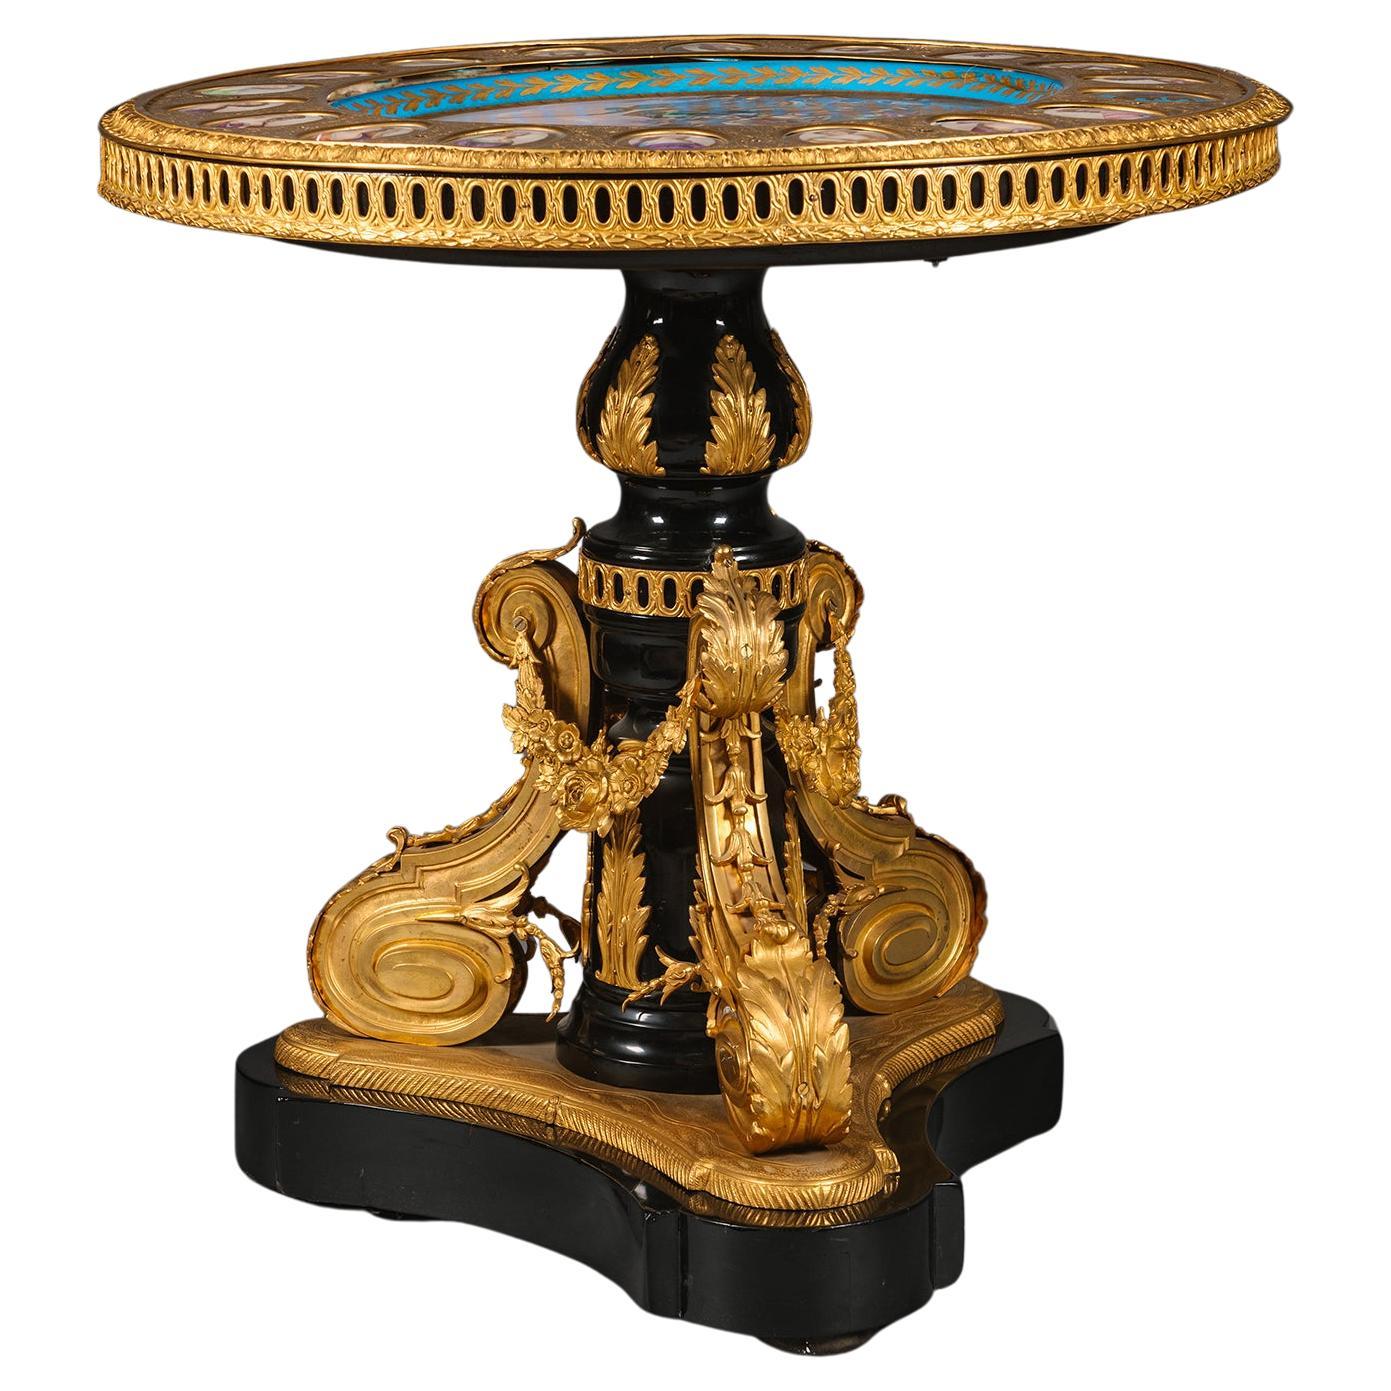 A Fine Sèvres-Style Porcelain and Gilt-Bronze Mounted Ebonised Centre Table For Sale